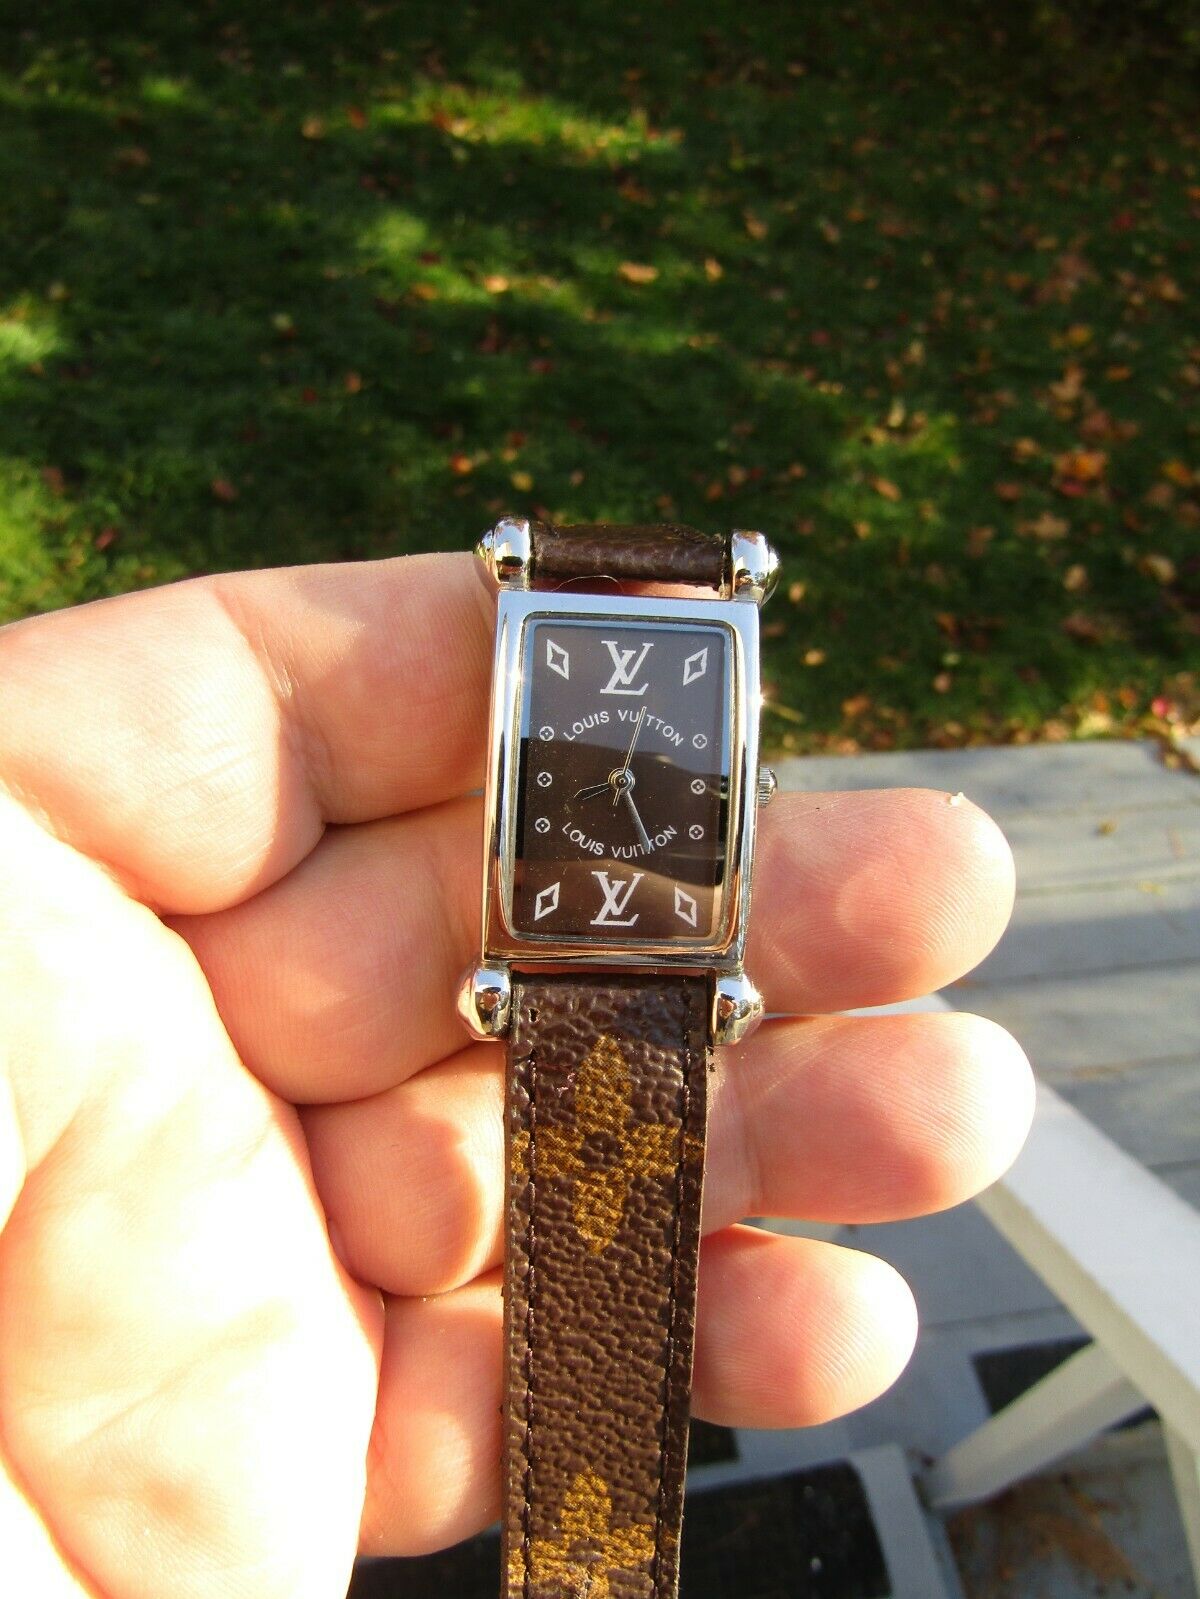 Estate+Louis+Vuitton+Ladies+Wrist+Watch+1187hs2003l+Leather+Band+Untested  for sale online